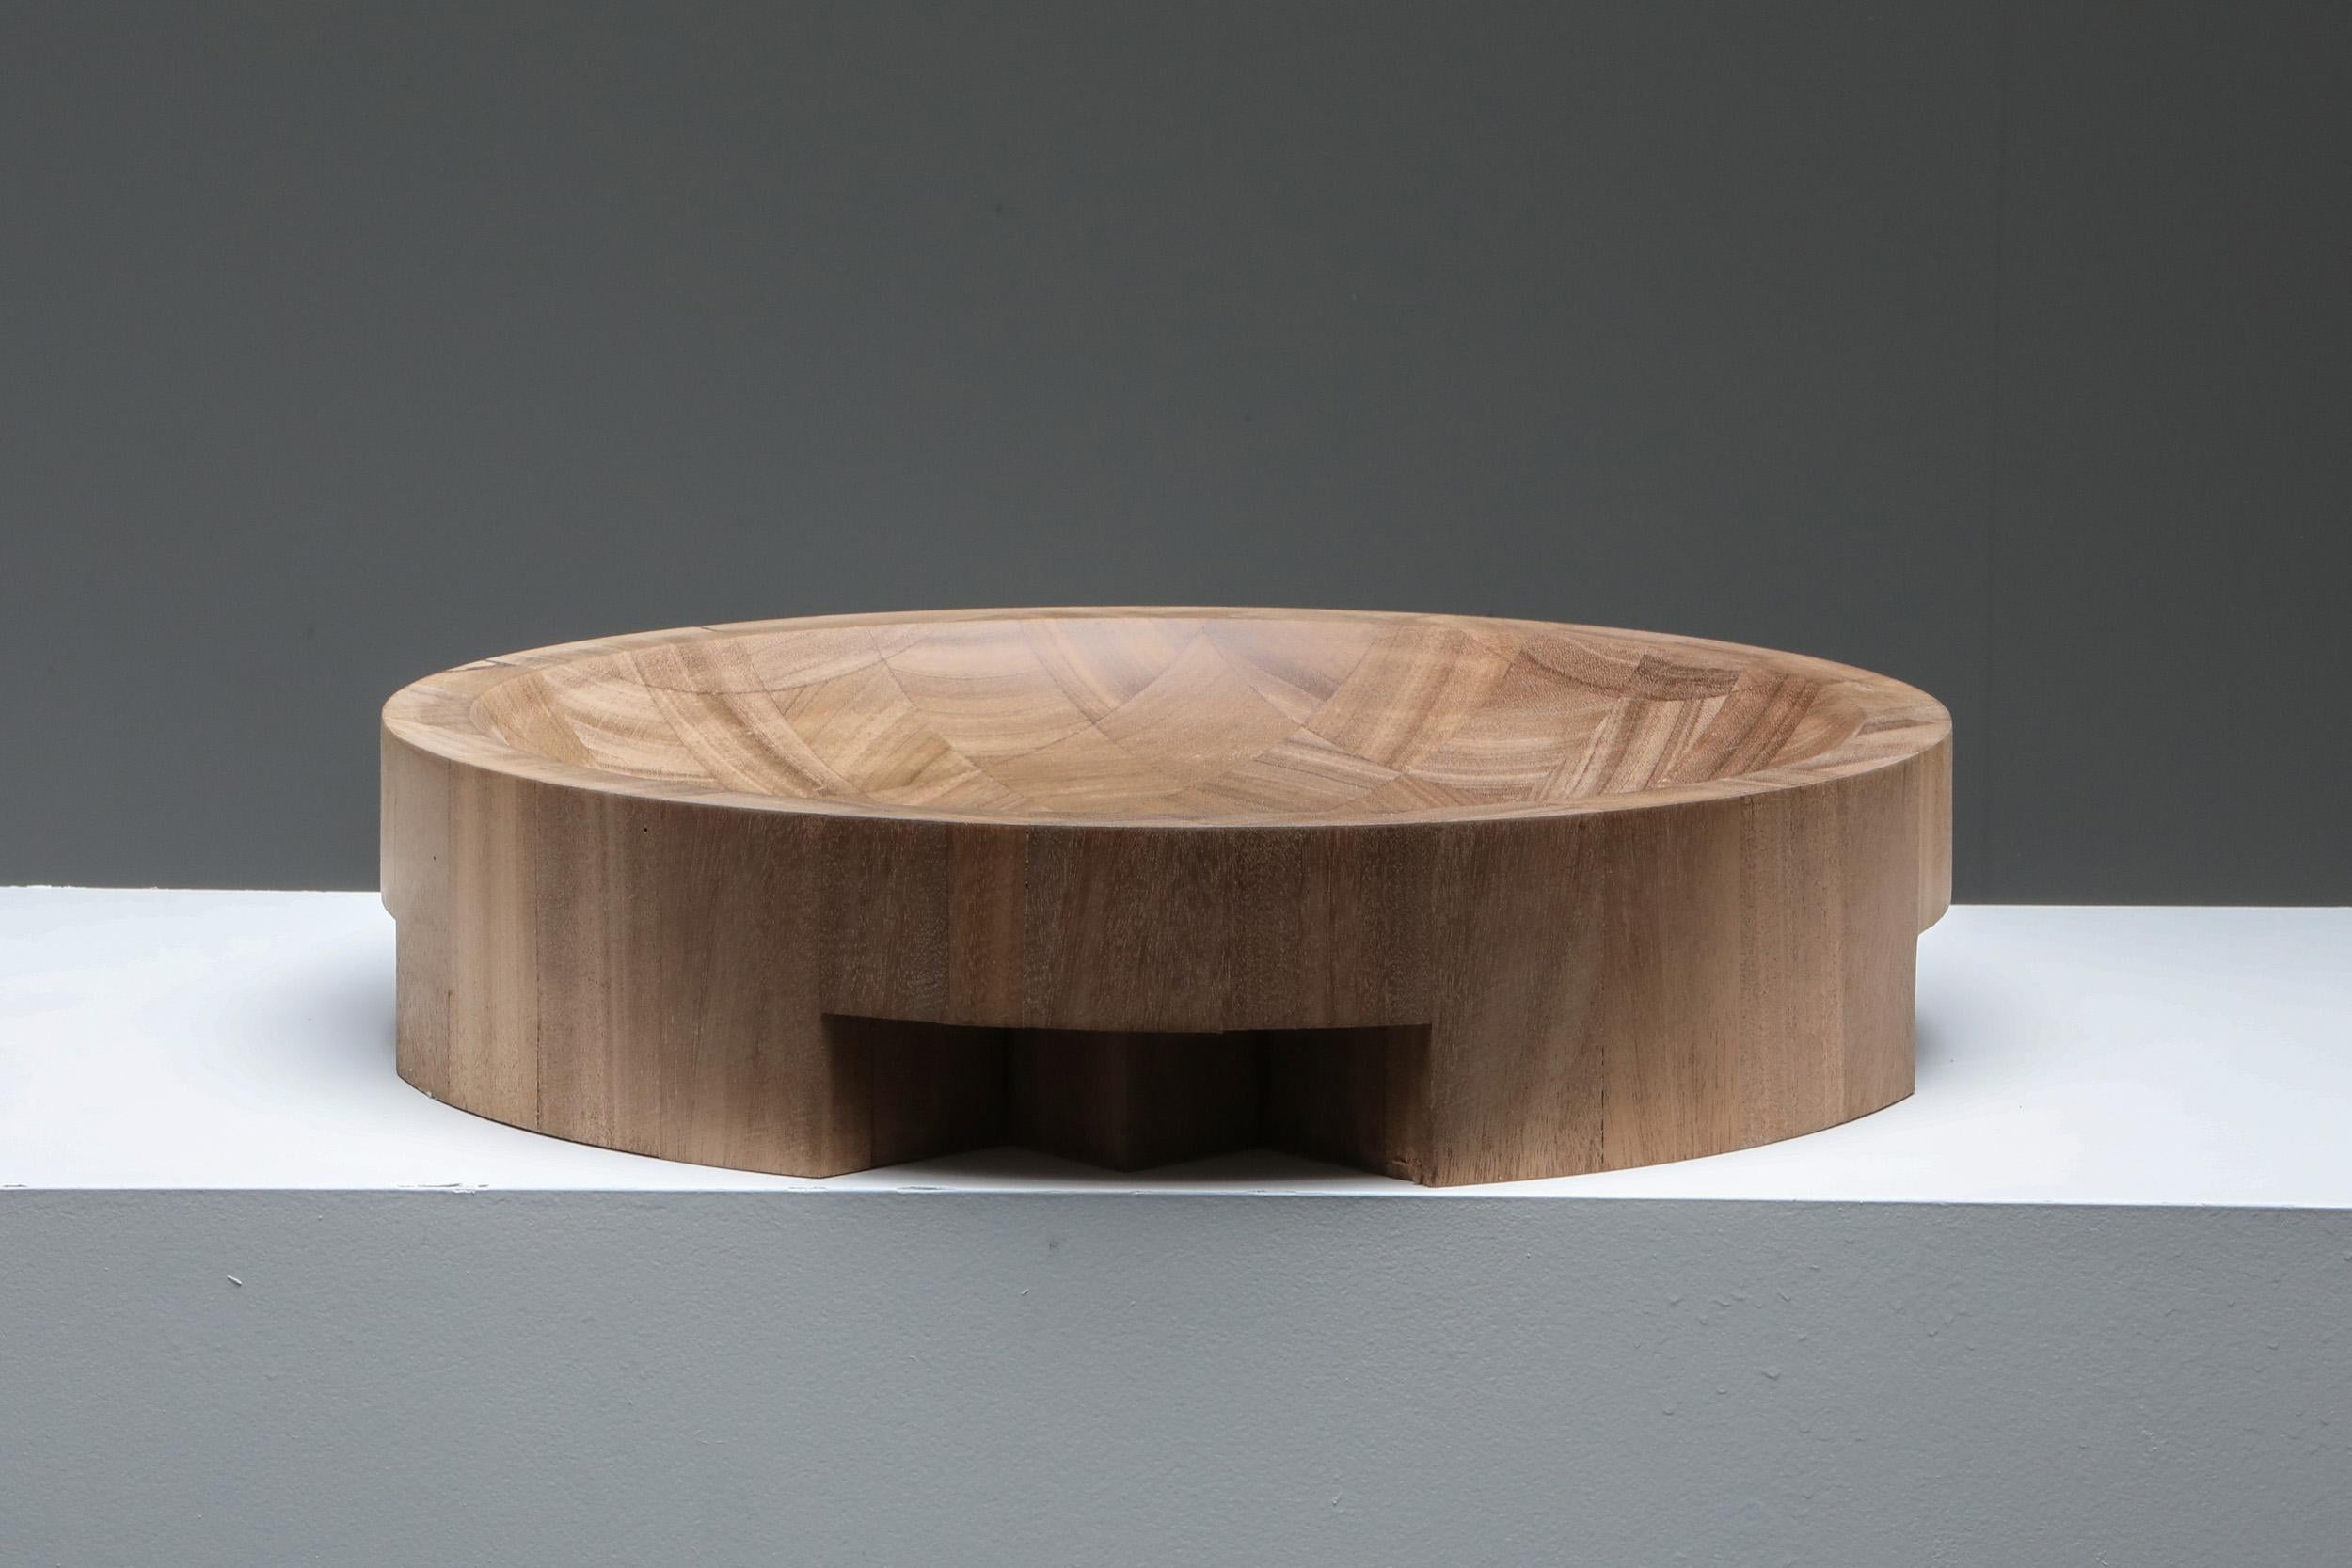 Arno Declercq, Belgian design, handcrafted

Made in African walnut, sanded and finished with varnish
43 cm wide x 43 cm long x 9 cm high / 17” wide x 17” long x 3.5” high

Belgian designer and art dealer, born in 1994, who makes bespoke objects